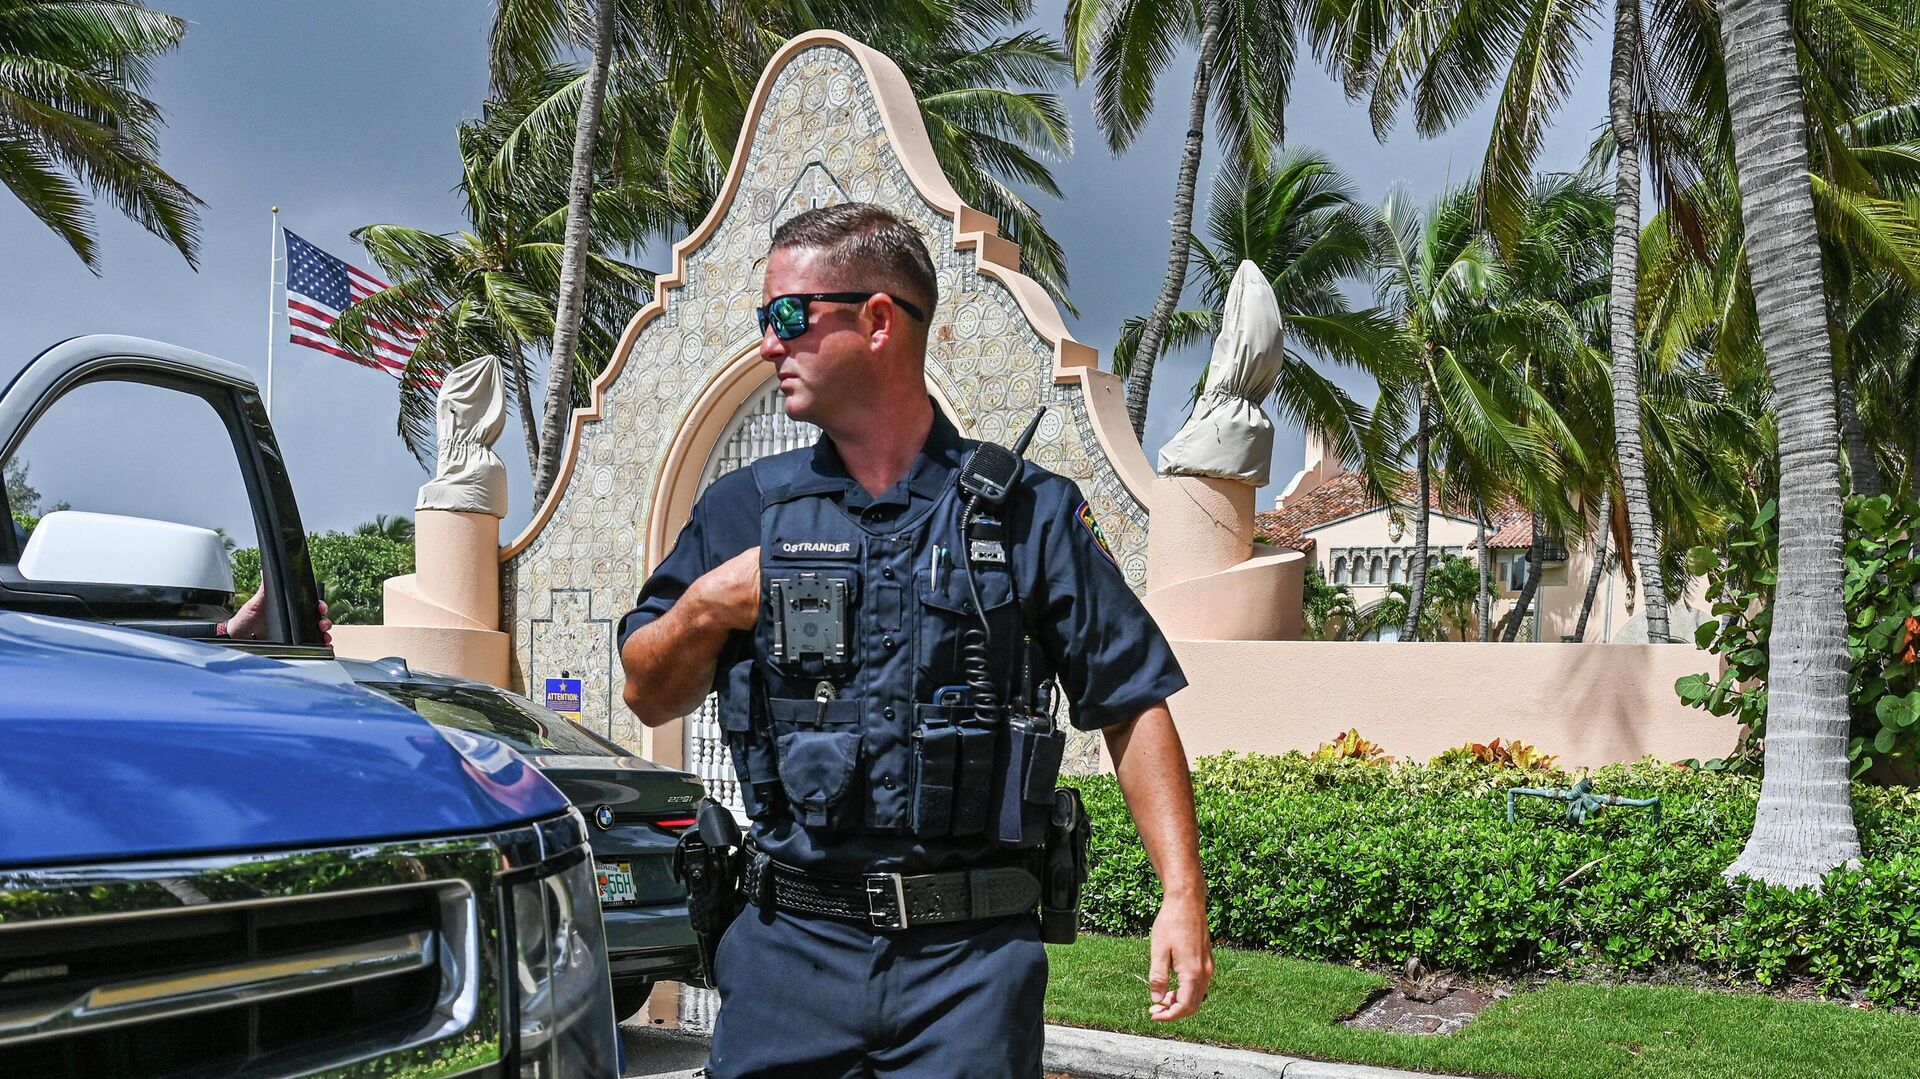 Local law enforcement officers are seen in front of the home of former President Donald Trump at Mar-A-Lago in Palm Beach, Florida on August 9, 2022. - Sputnik International, 1920, 12.08.2022